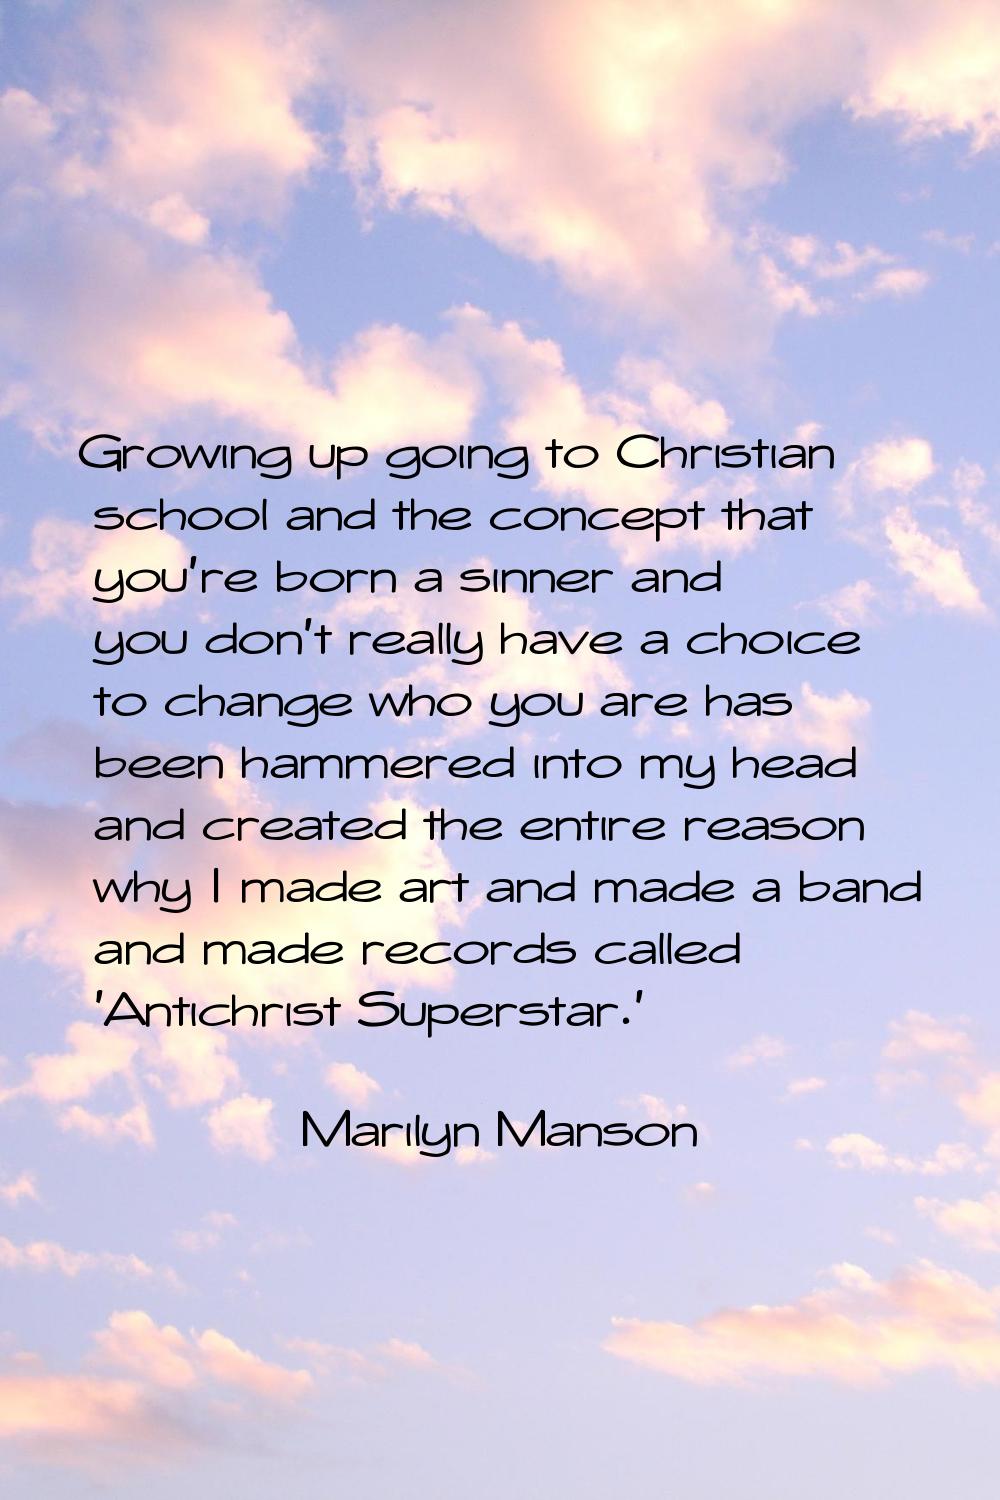 Growing up going to Christian school and the concept that you're born a sinner and you don't really